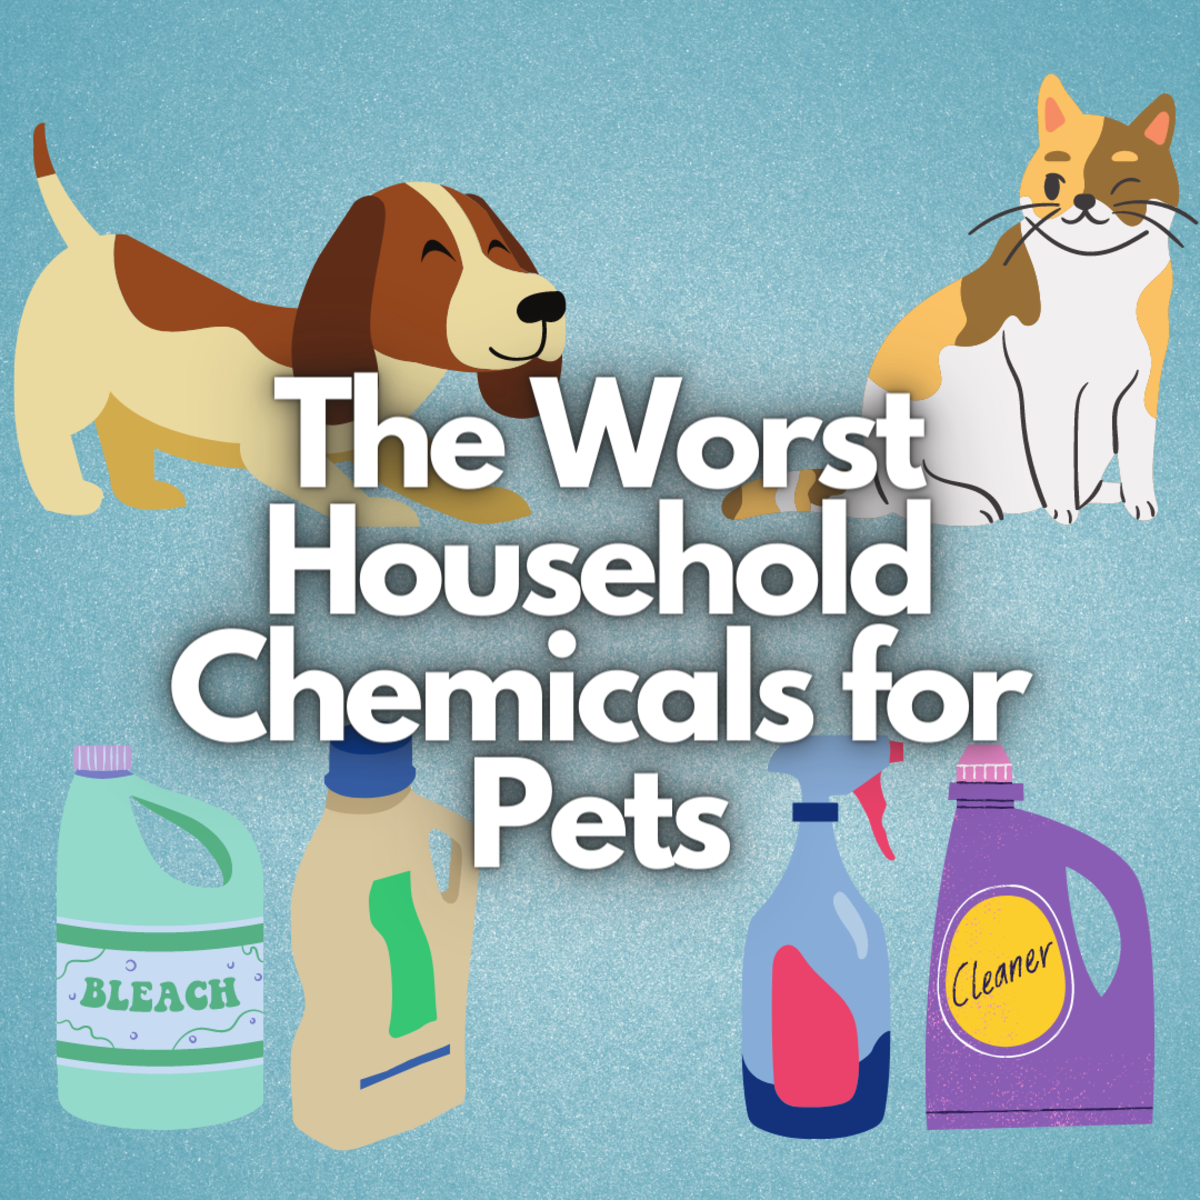 Bleach and Other Household Chemicals That Are Bad for Pets - PetHelpful